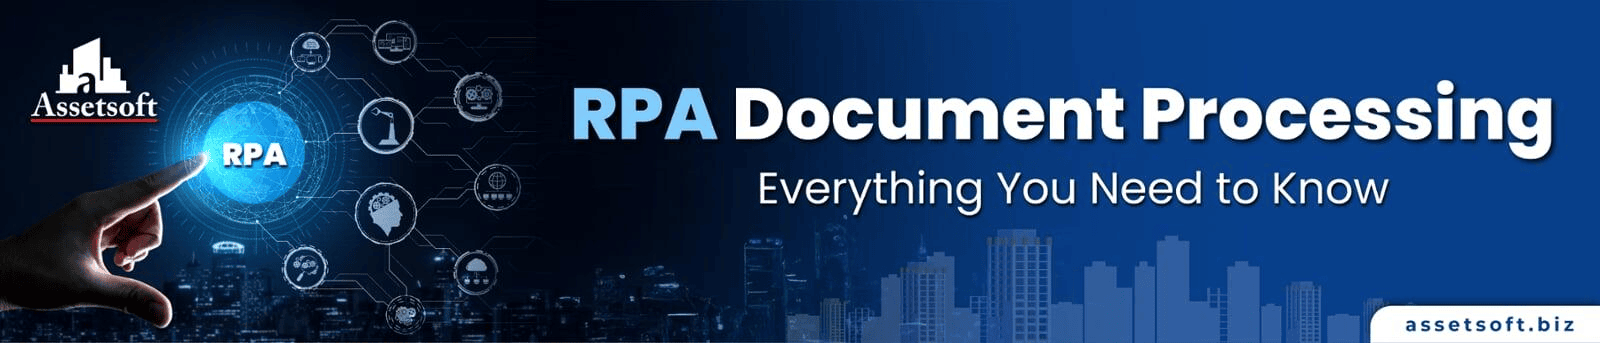 RPA Document Processing- Everything You Need to Know